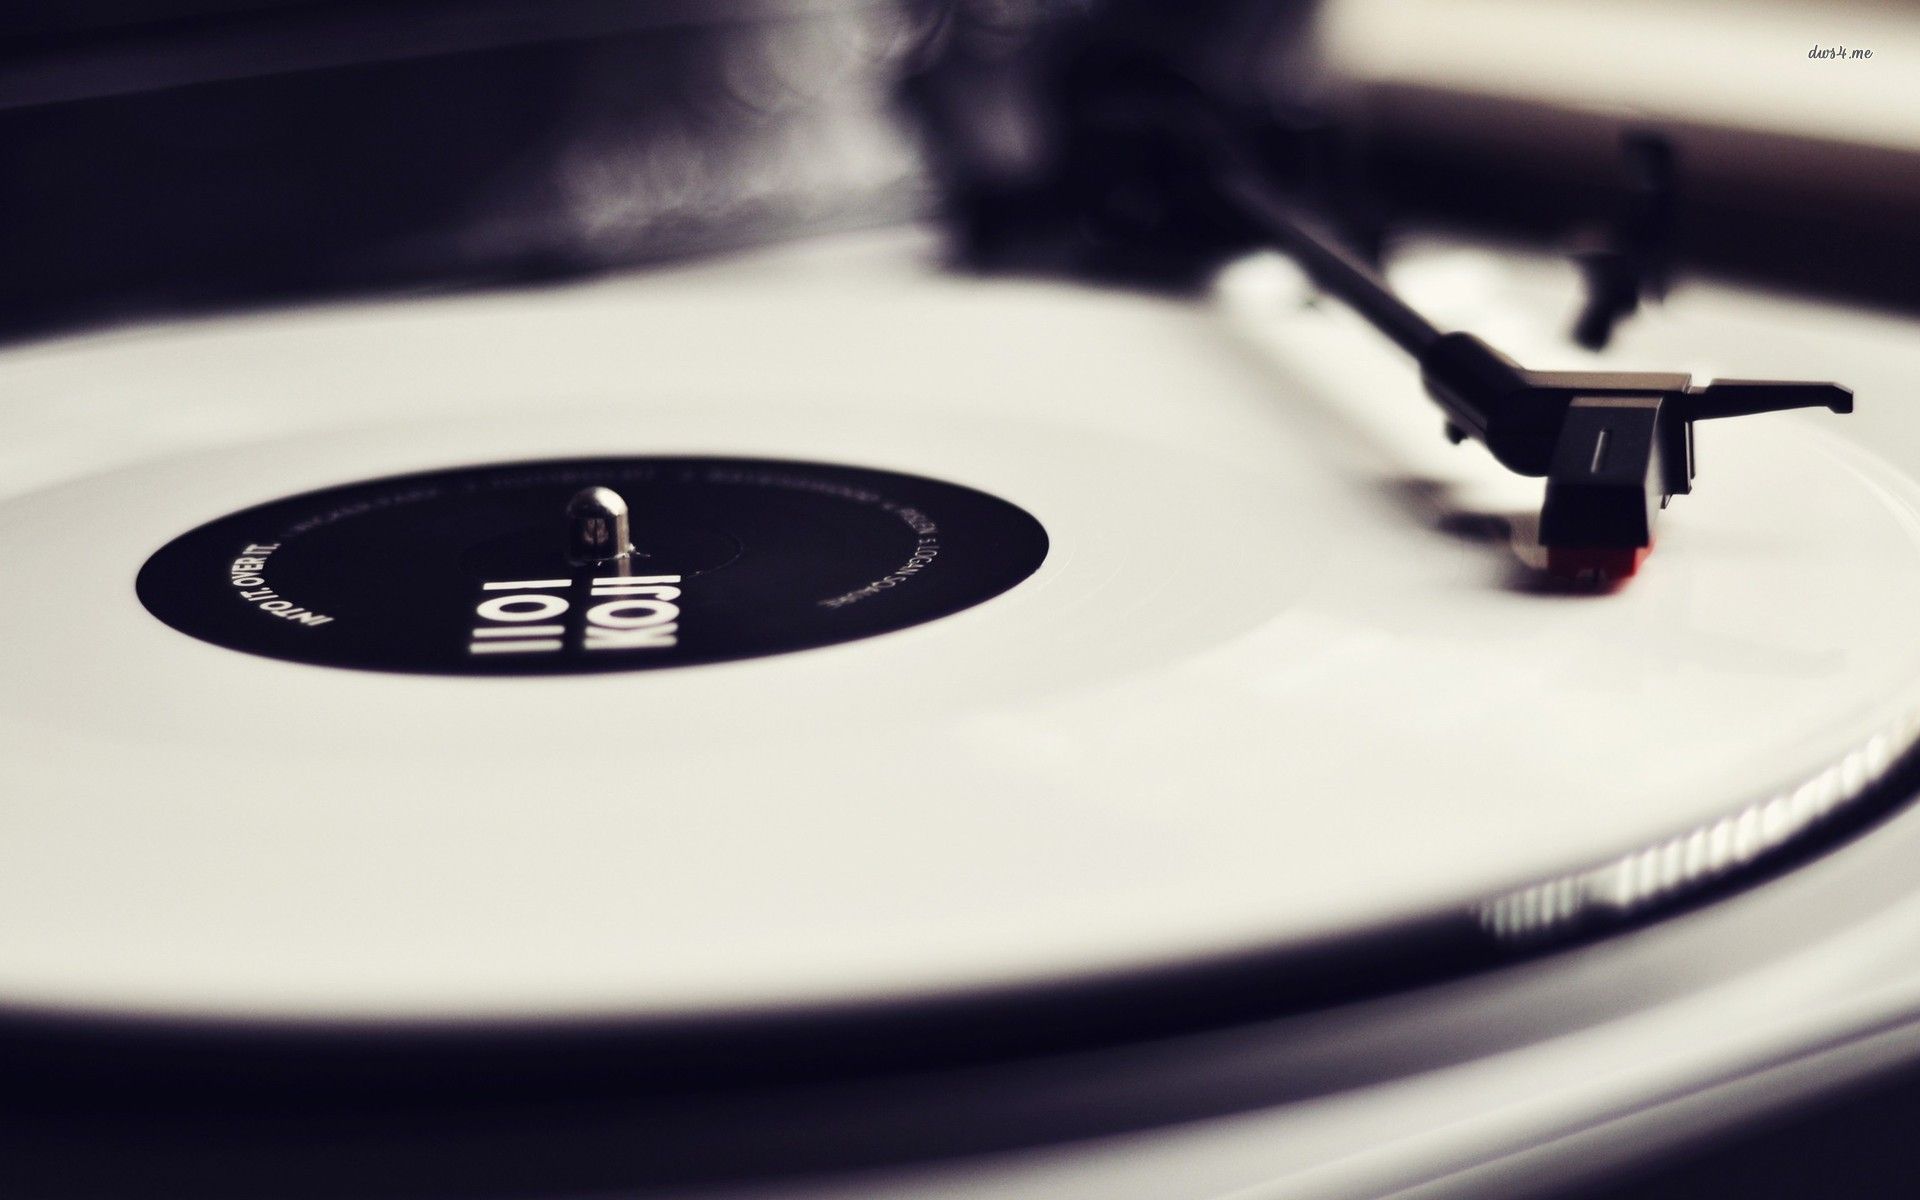 Turntable wallpaper - Music wallpapers -